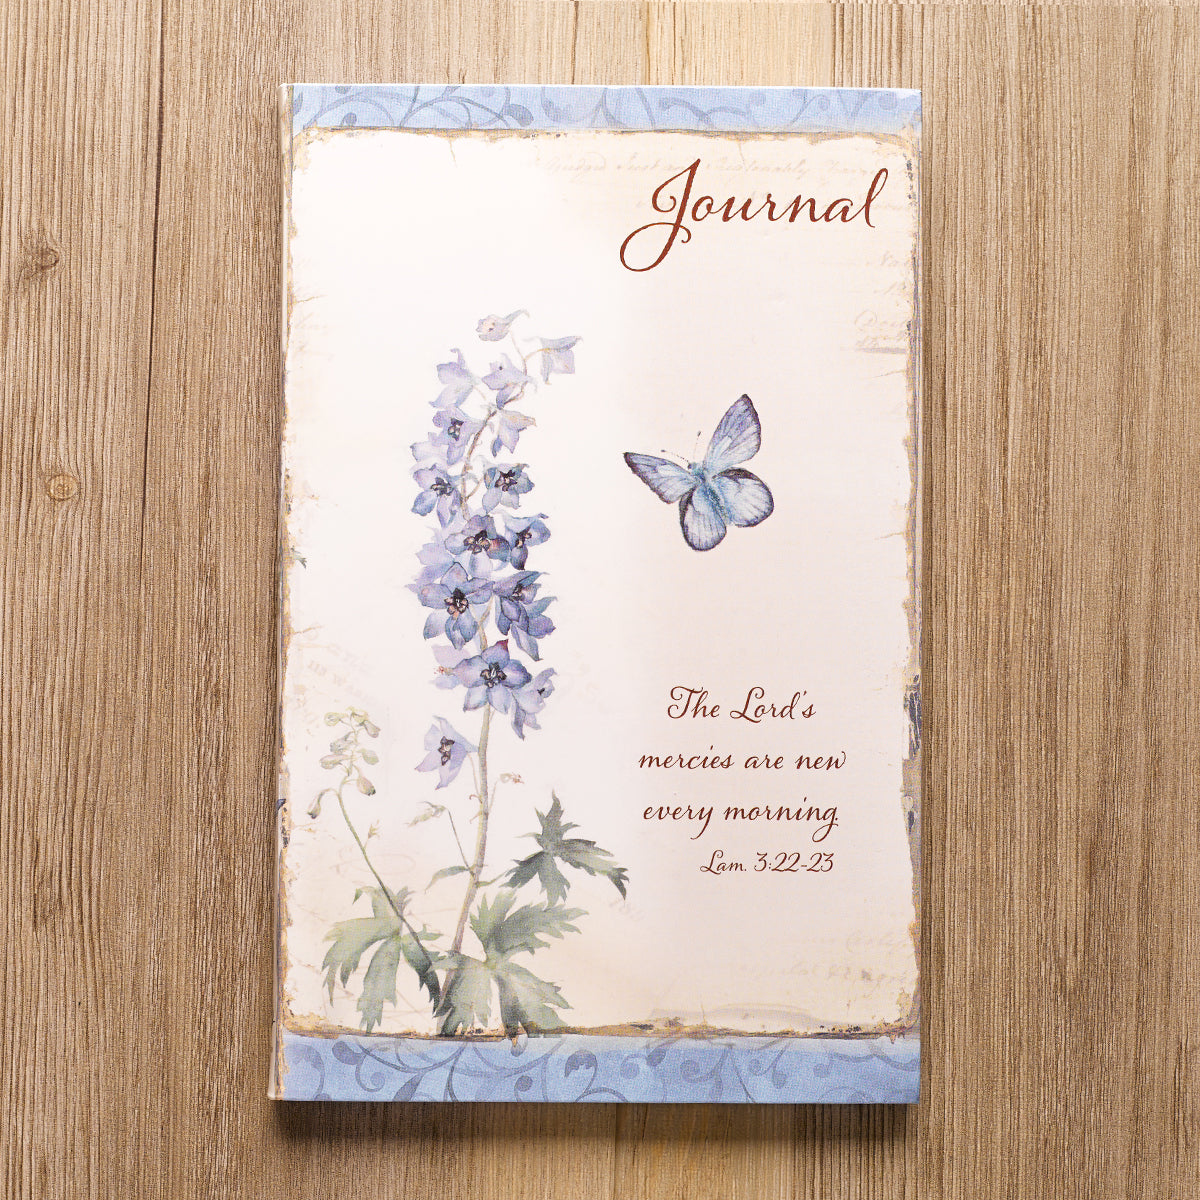 The Lord's Mercies Are New Flexcover Journal - Lamentations 3:22-23 - The Christian Gift Company